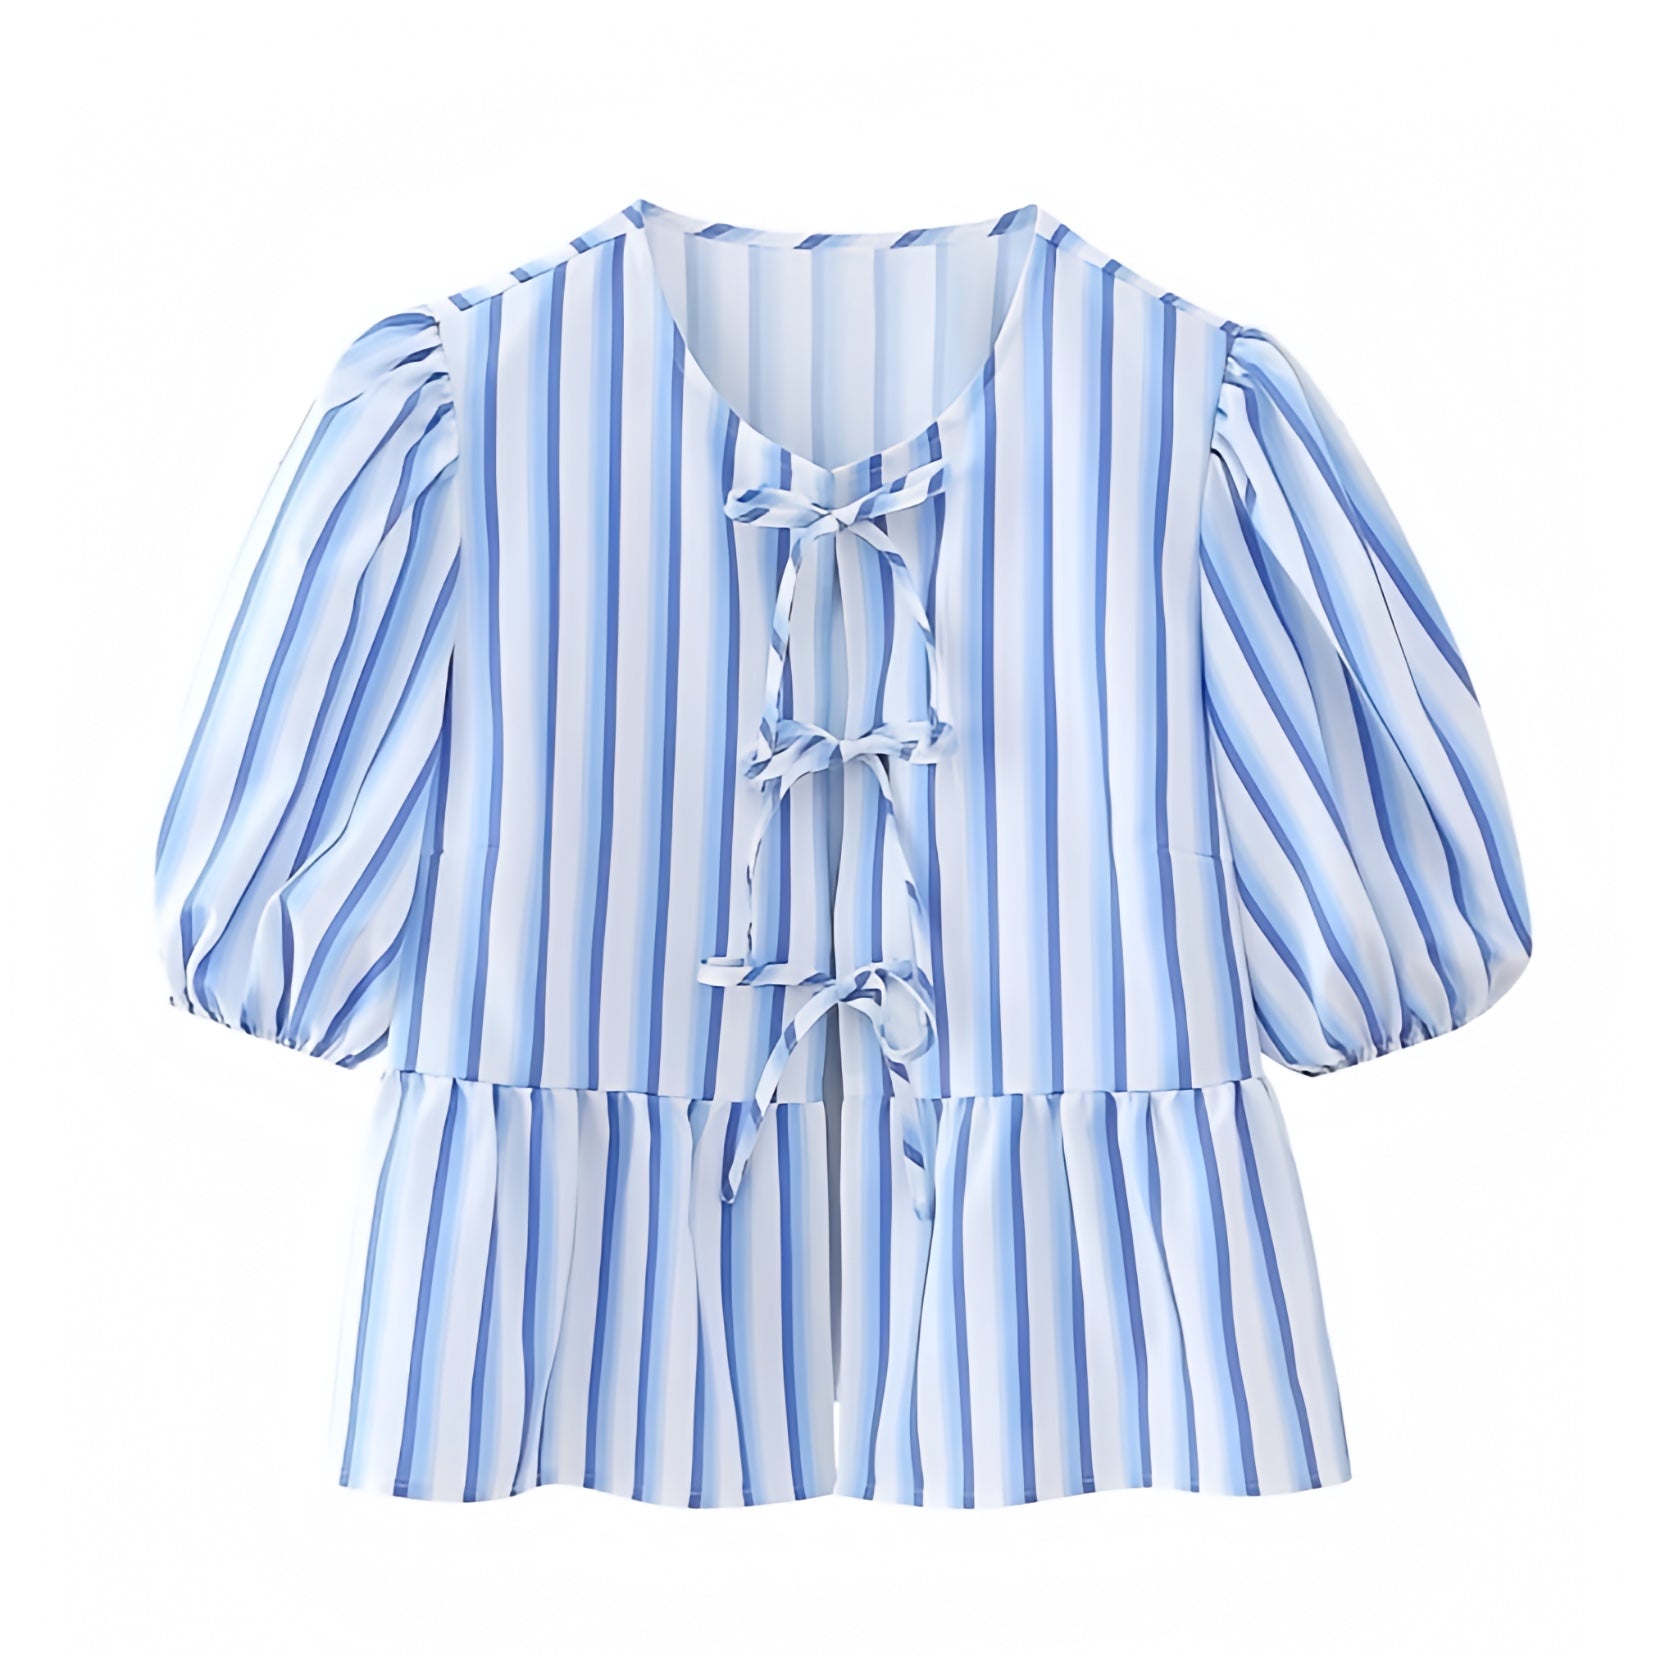 light-blue-and-white-striped-seersucker-pinstriped-multi-color-patterned-bow-lace-up-v-neck-short-puff-sleeve-camisole-crop-top-blouse-women-ladies-chic-trendy-spring-2024-summer-elegant-casual-feminine-classy-preppy-style-coastal-granddaughter-beach-wear-european-nautical-seaside-vacation-shirt-zara-revolve